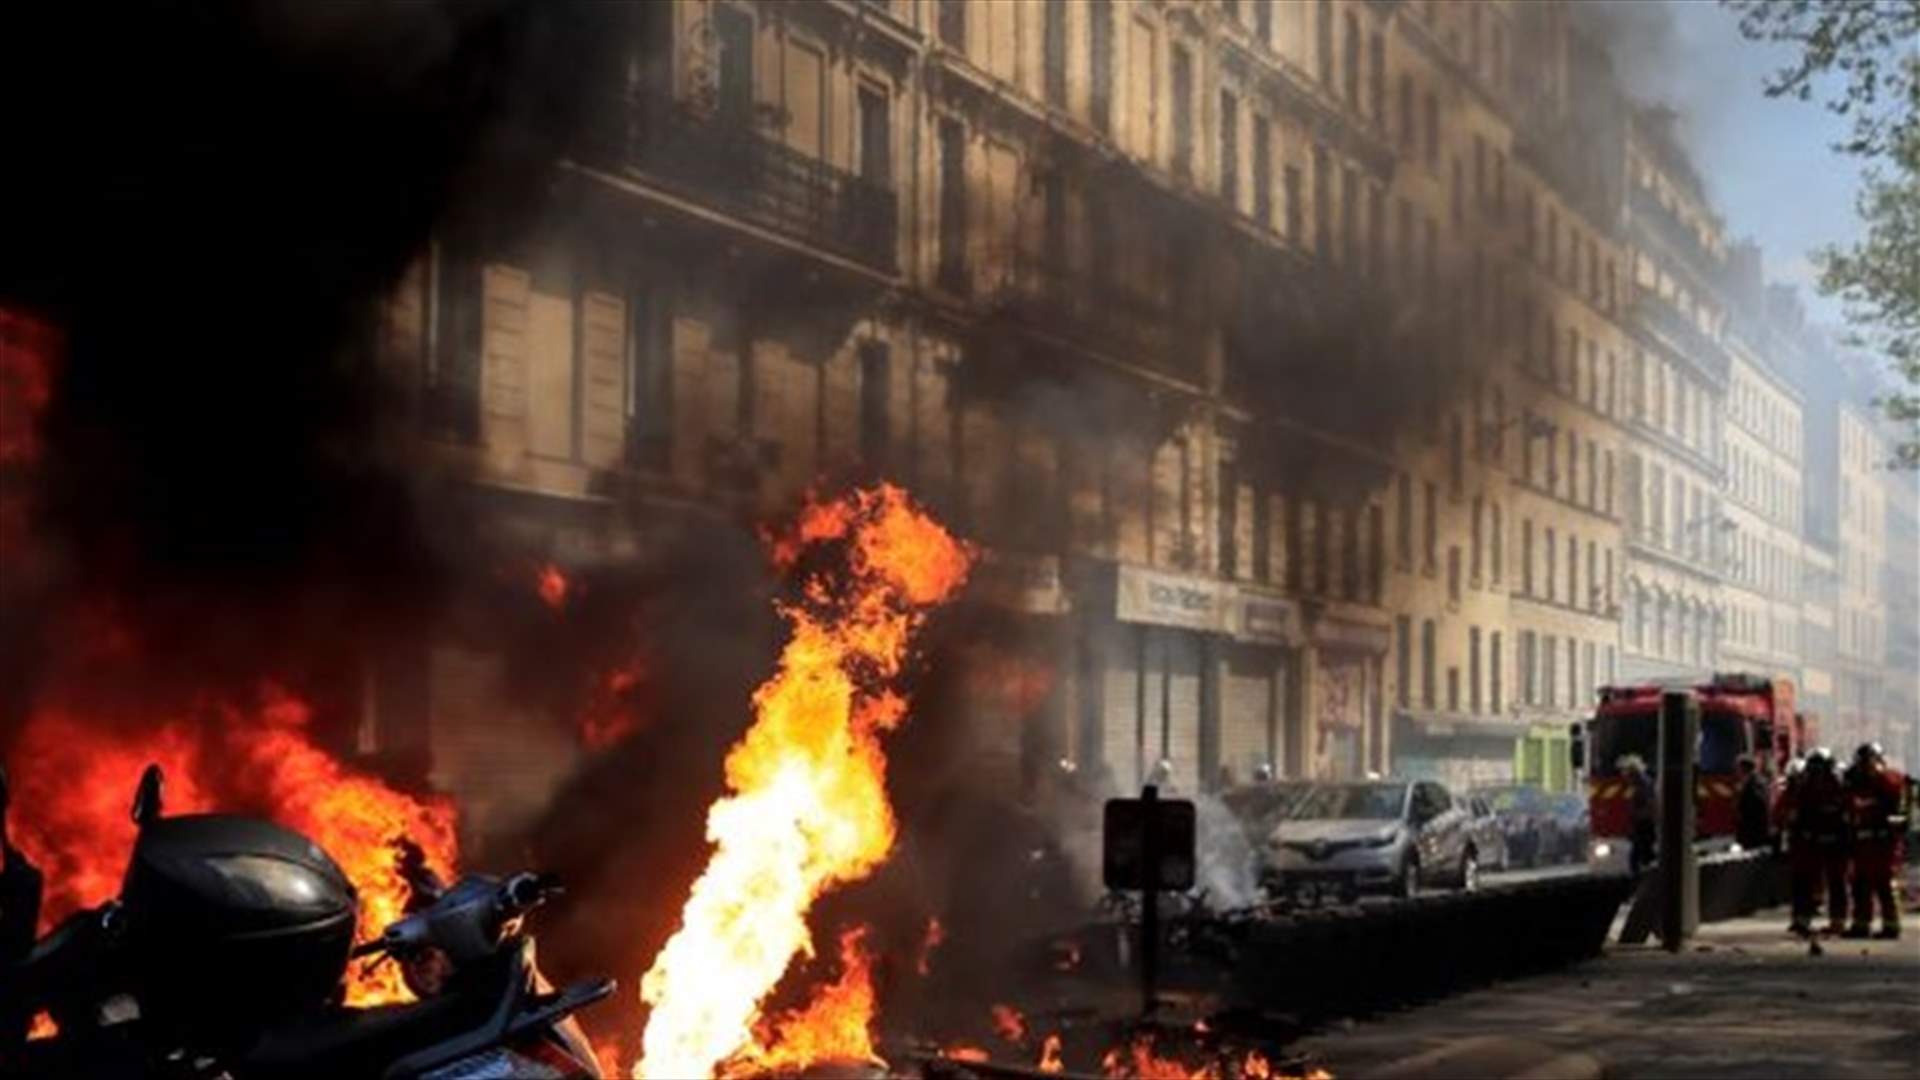 Clashes break out between police and some yellow vest rioters in Paris